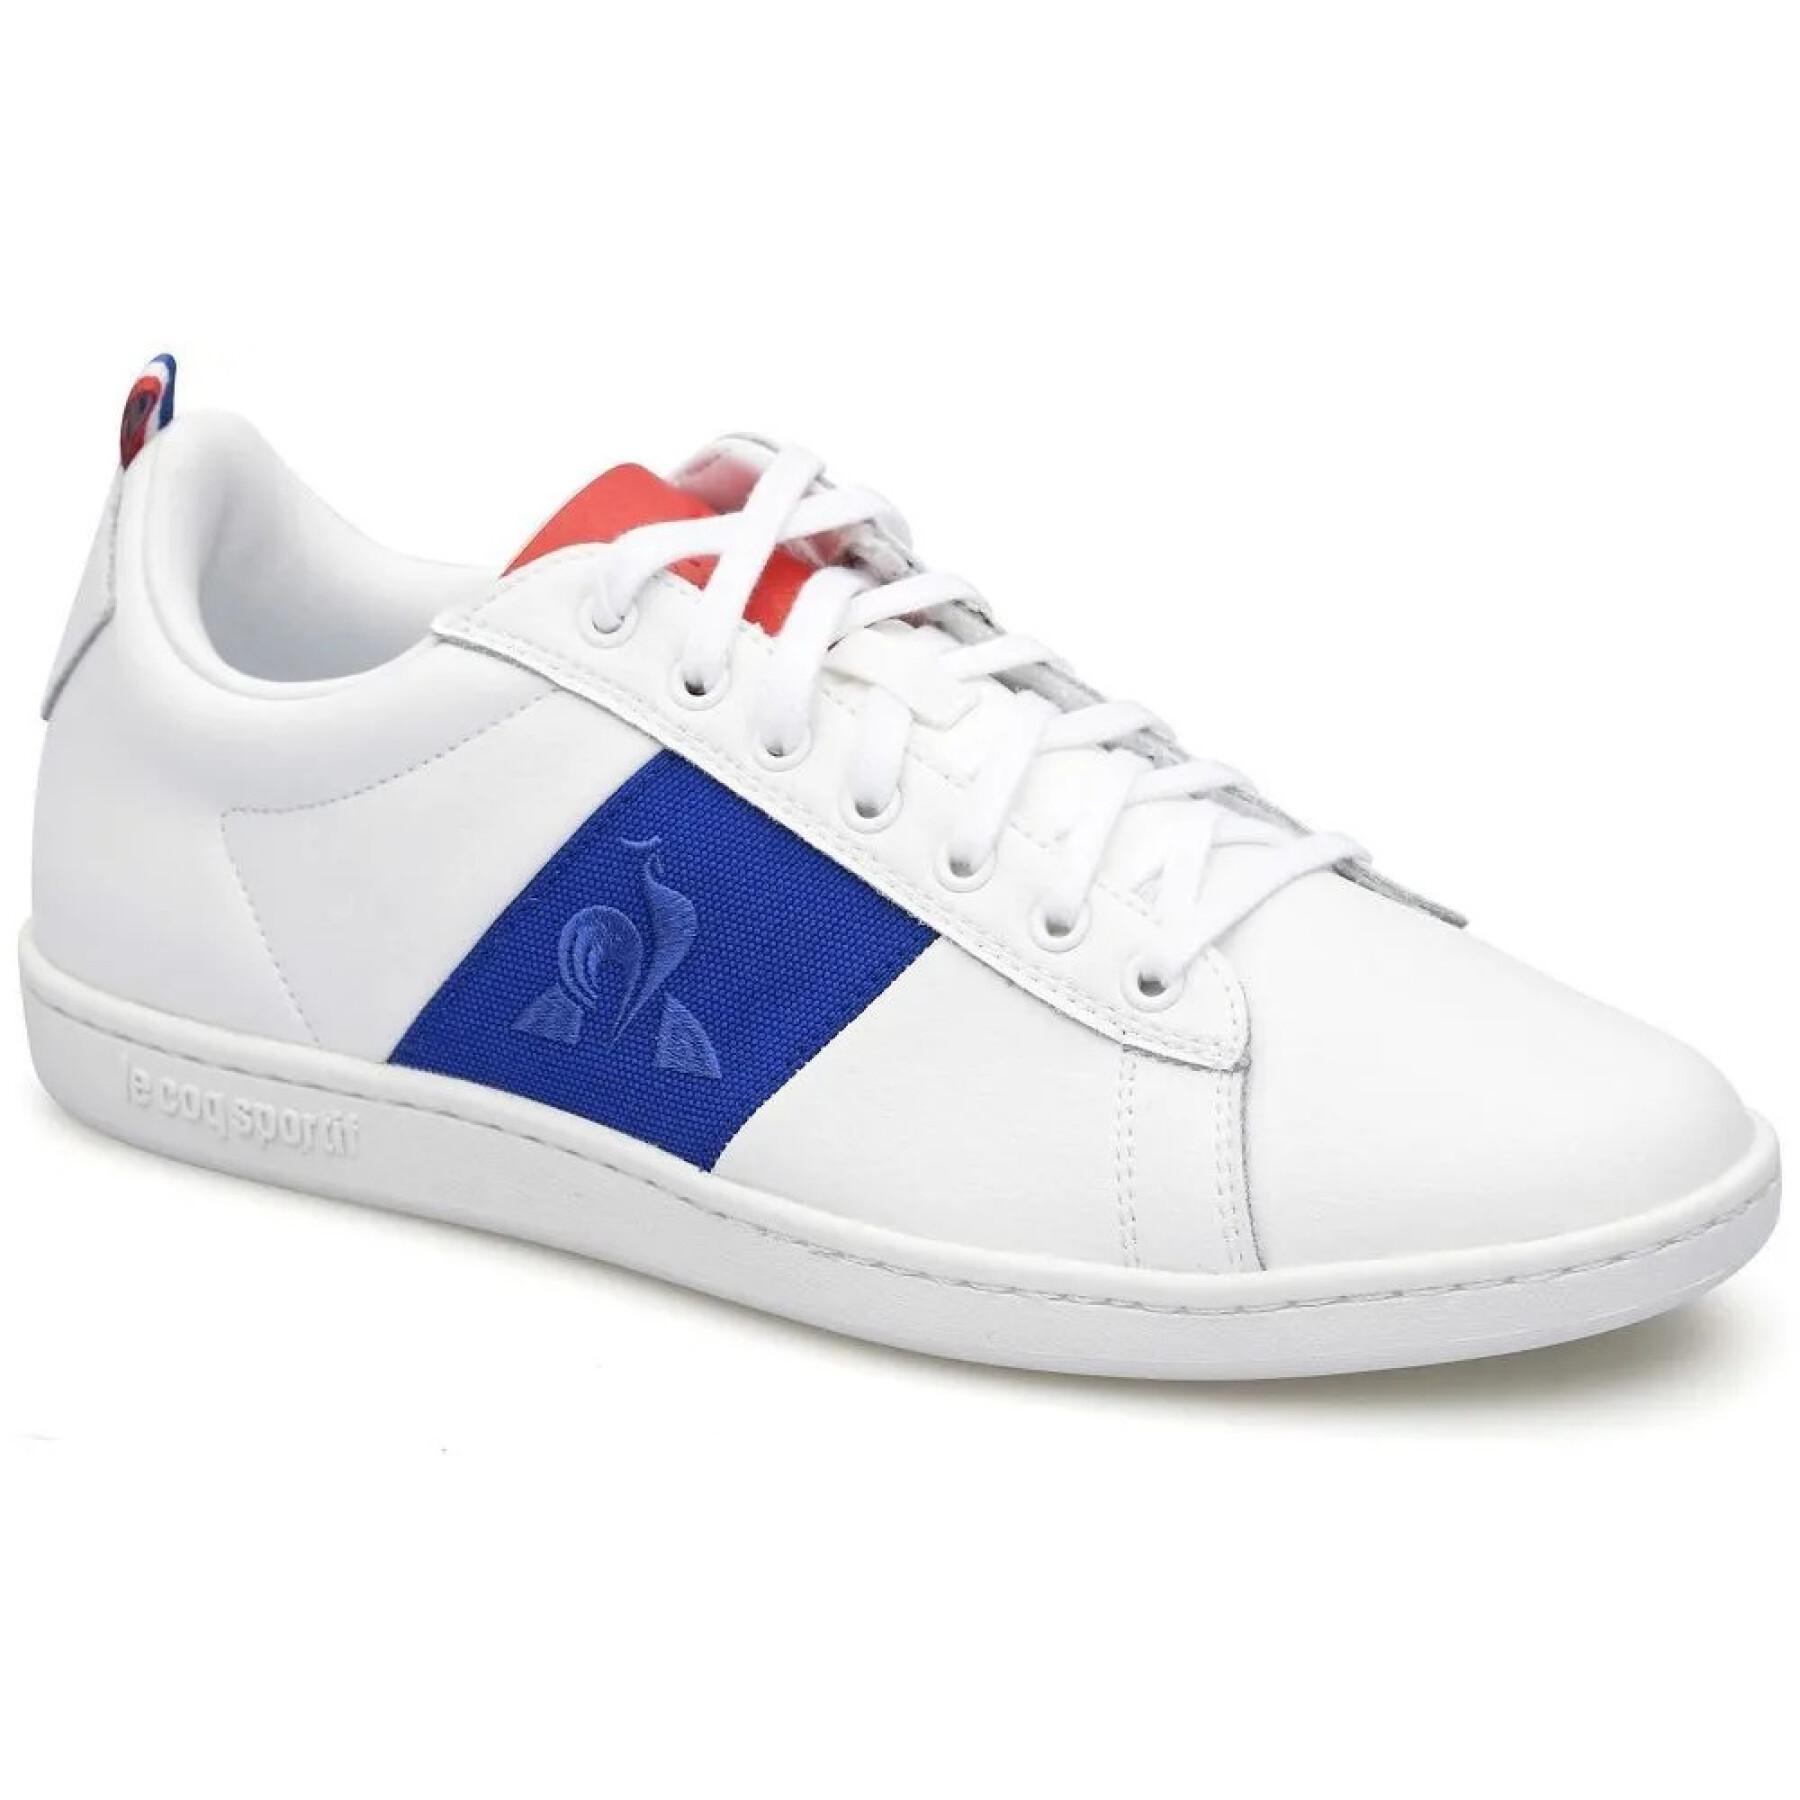 Sneakers Le Coq Sportif Courtclassic bbr